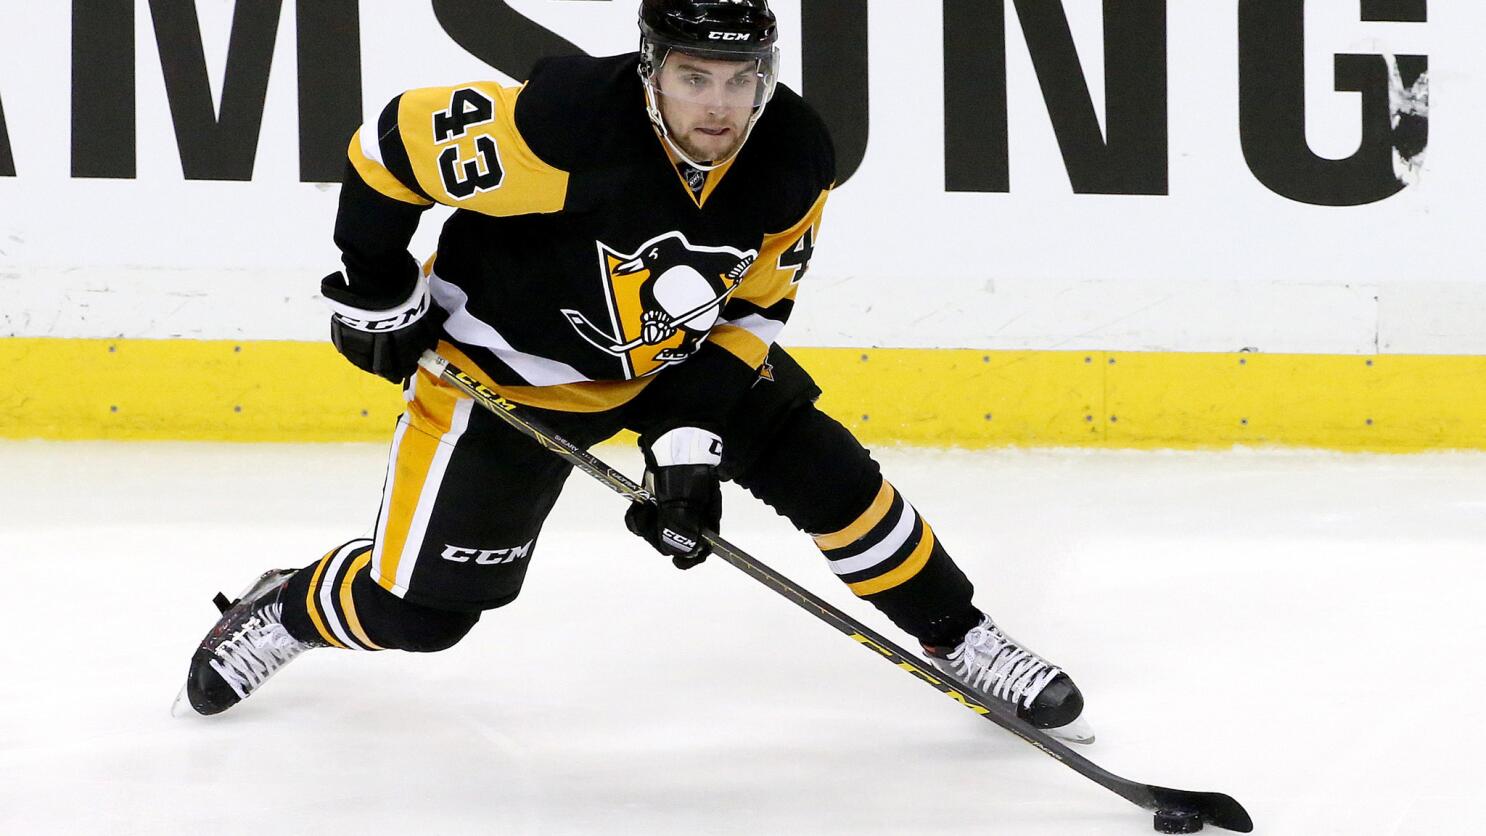 Sidney Crosby: 'The Kid' Grows Up